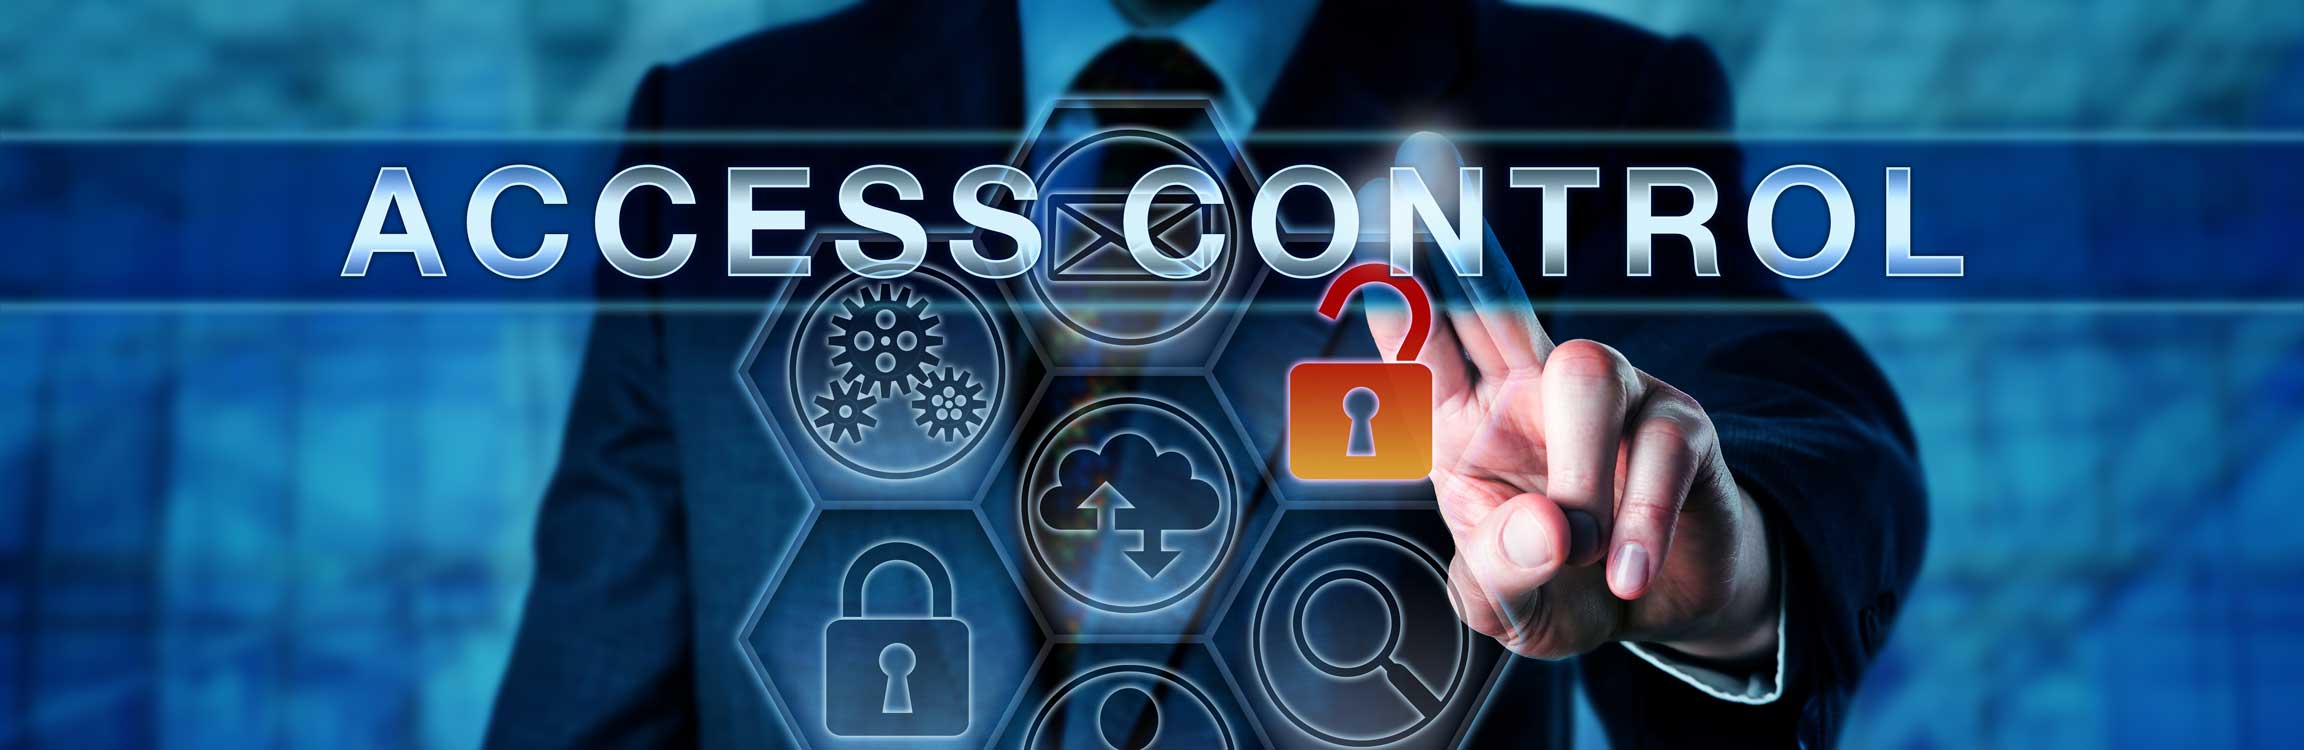 Access Control Banner